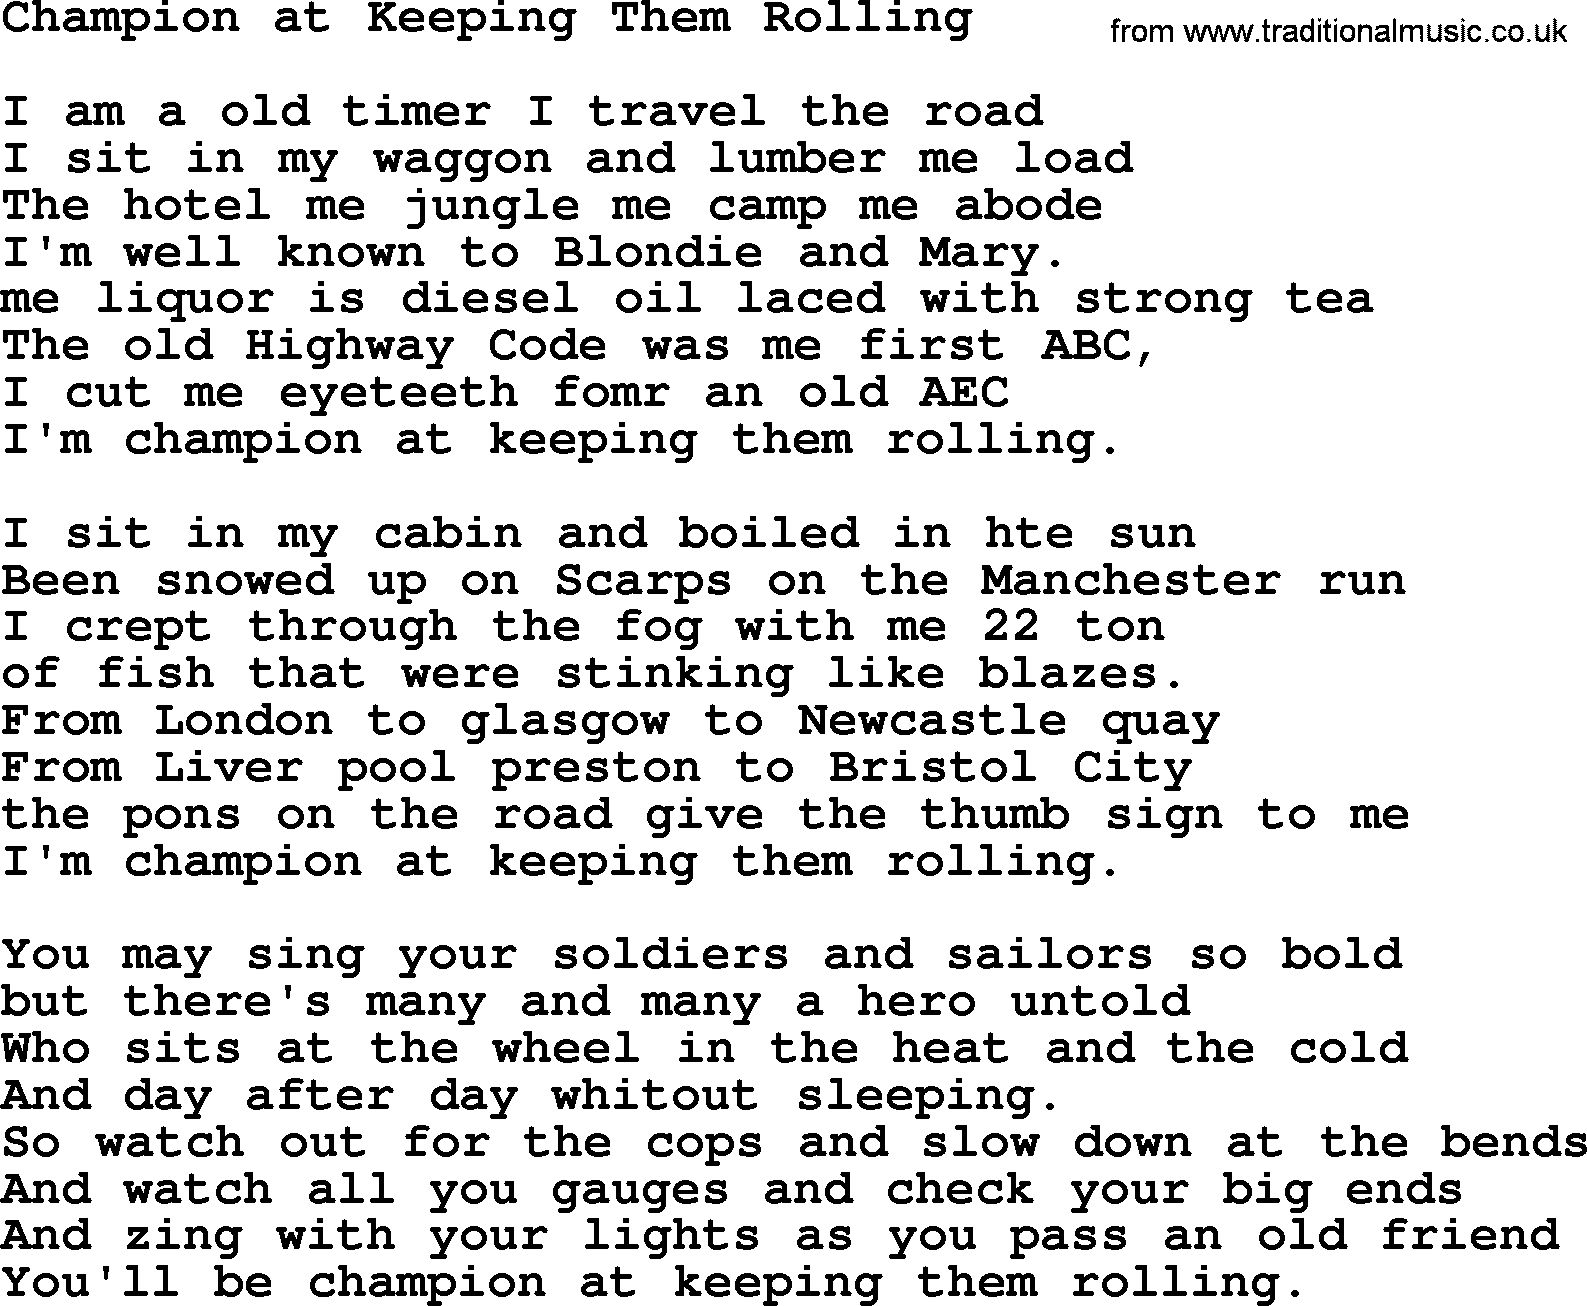 Champion At Keeping Them Rolling by Dubliners - song lyrics and chords